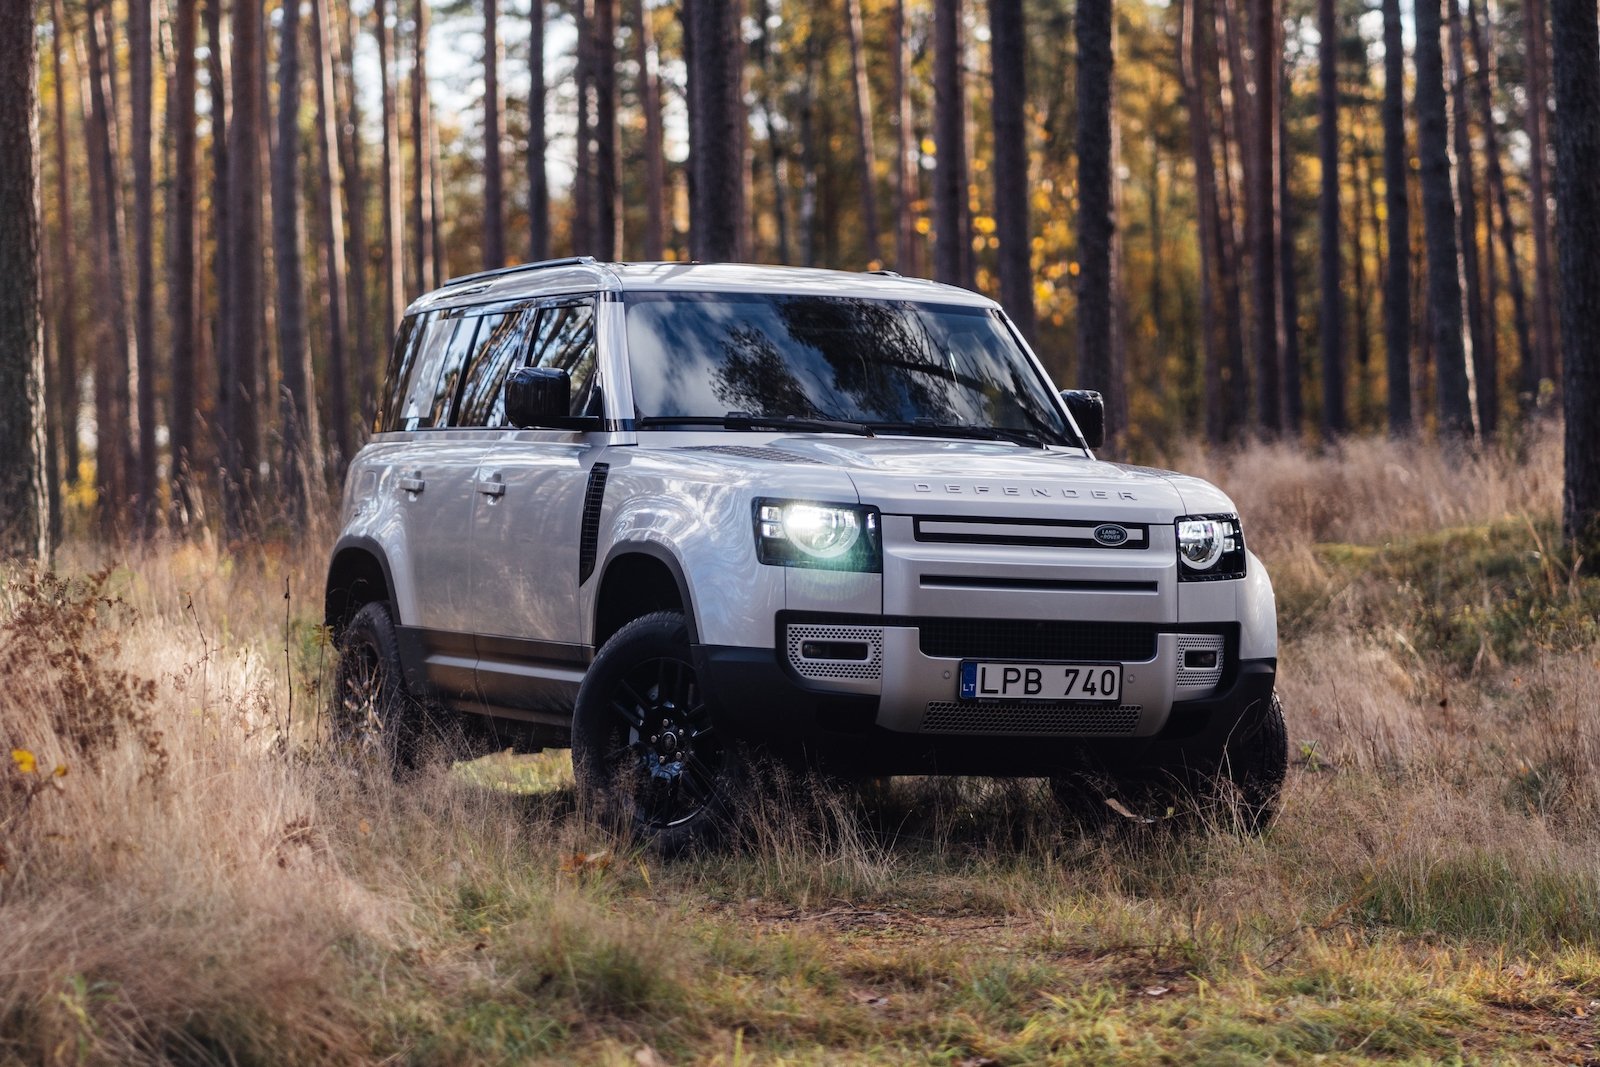 <p>Land Rover stands out with its luxury and capability in tough terrains, yet it’s notorious for its reliability issues. Problems typically revolve around the air suspension, electrical systems, and drivetrain components, particularly in models like the Range Rover and Discovery.</p> <p>According to <a href="https://www.team-bhp.com/forum/international-automotive-scene/262498-jd-power-study-lexus-most-dependable-brand-land-rover-languishes-bottom.html#:~:text=The%20study%20found%20that%206,252%20PP100)%20faring%20slightly%20better." rel="noopener">J.D. Power’s Vehicle Dependability Study</a>, these issues are prevalent enough to often place Land Rover among the least reliable brands. If you’re eyeing a Land Rover, it might be wise to also look at extended warranty options or be prepared for potentially higher maintenance costs.</p>